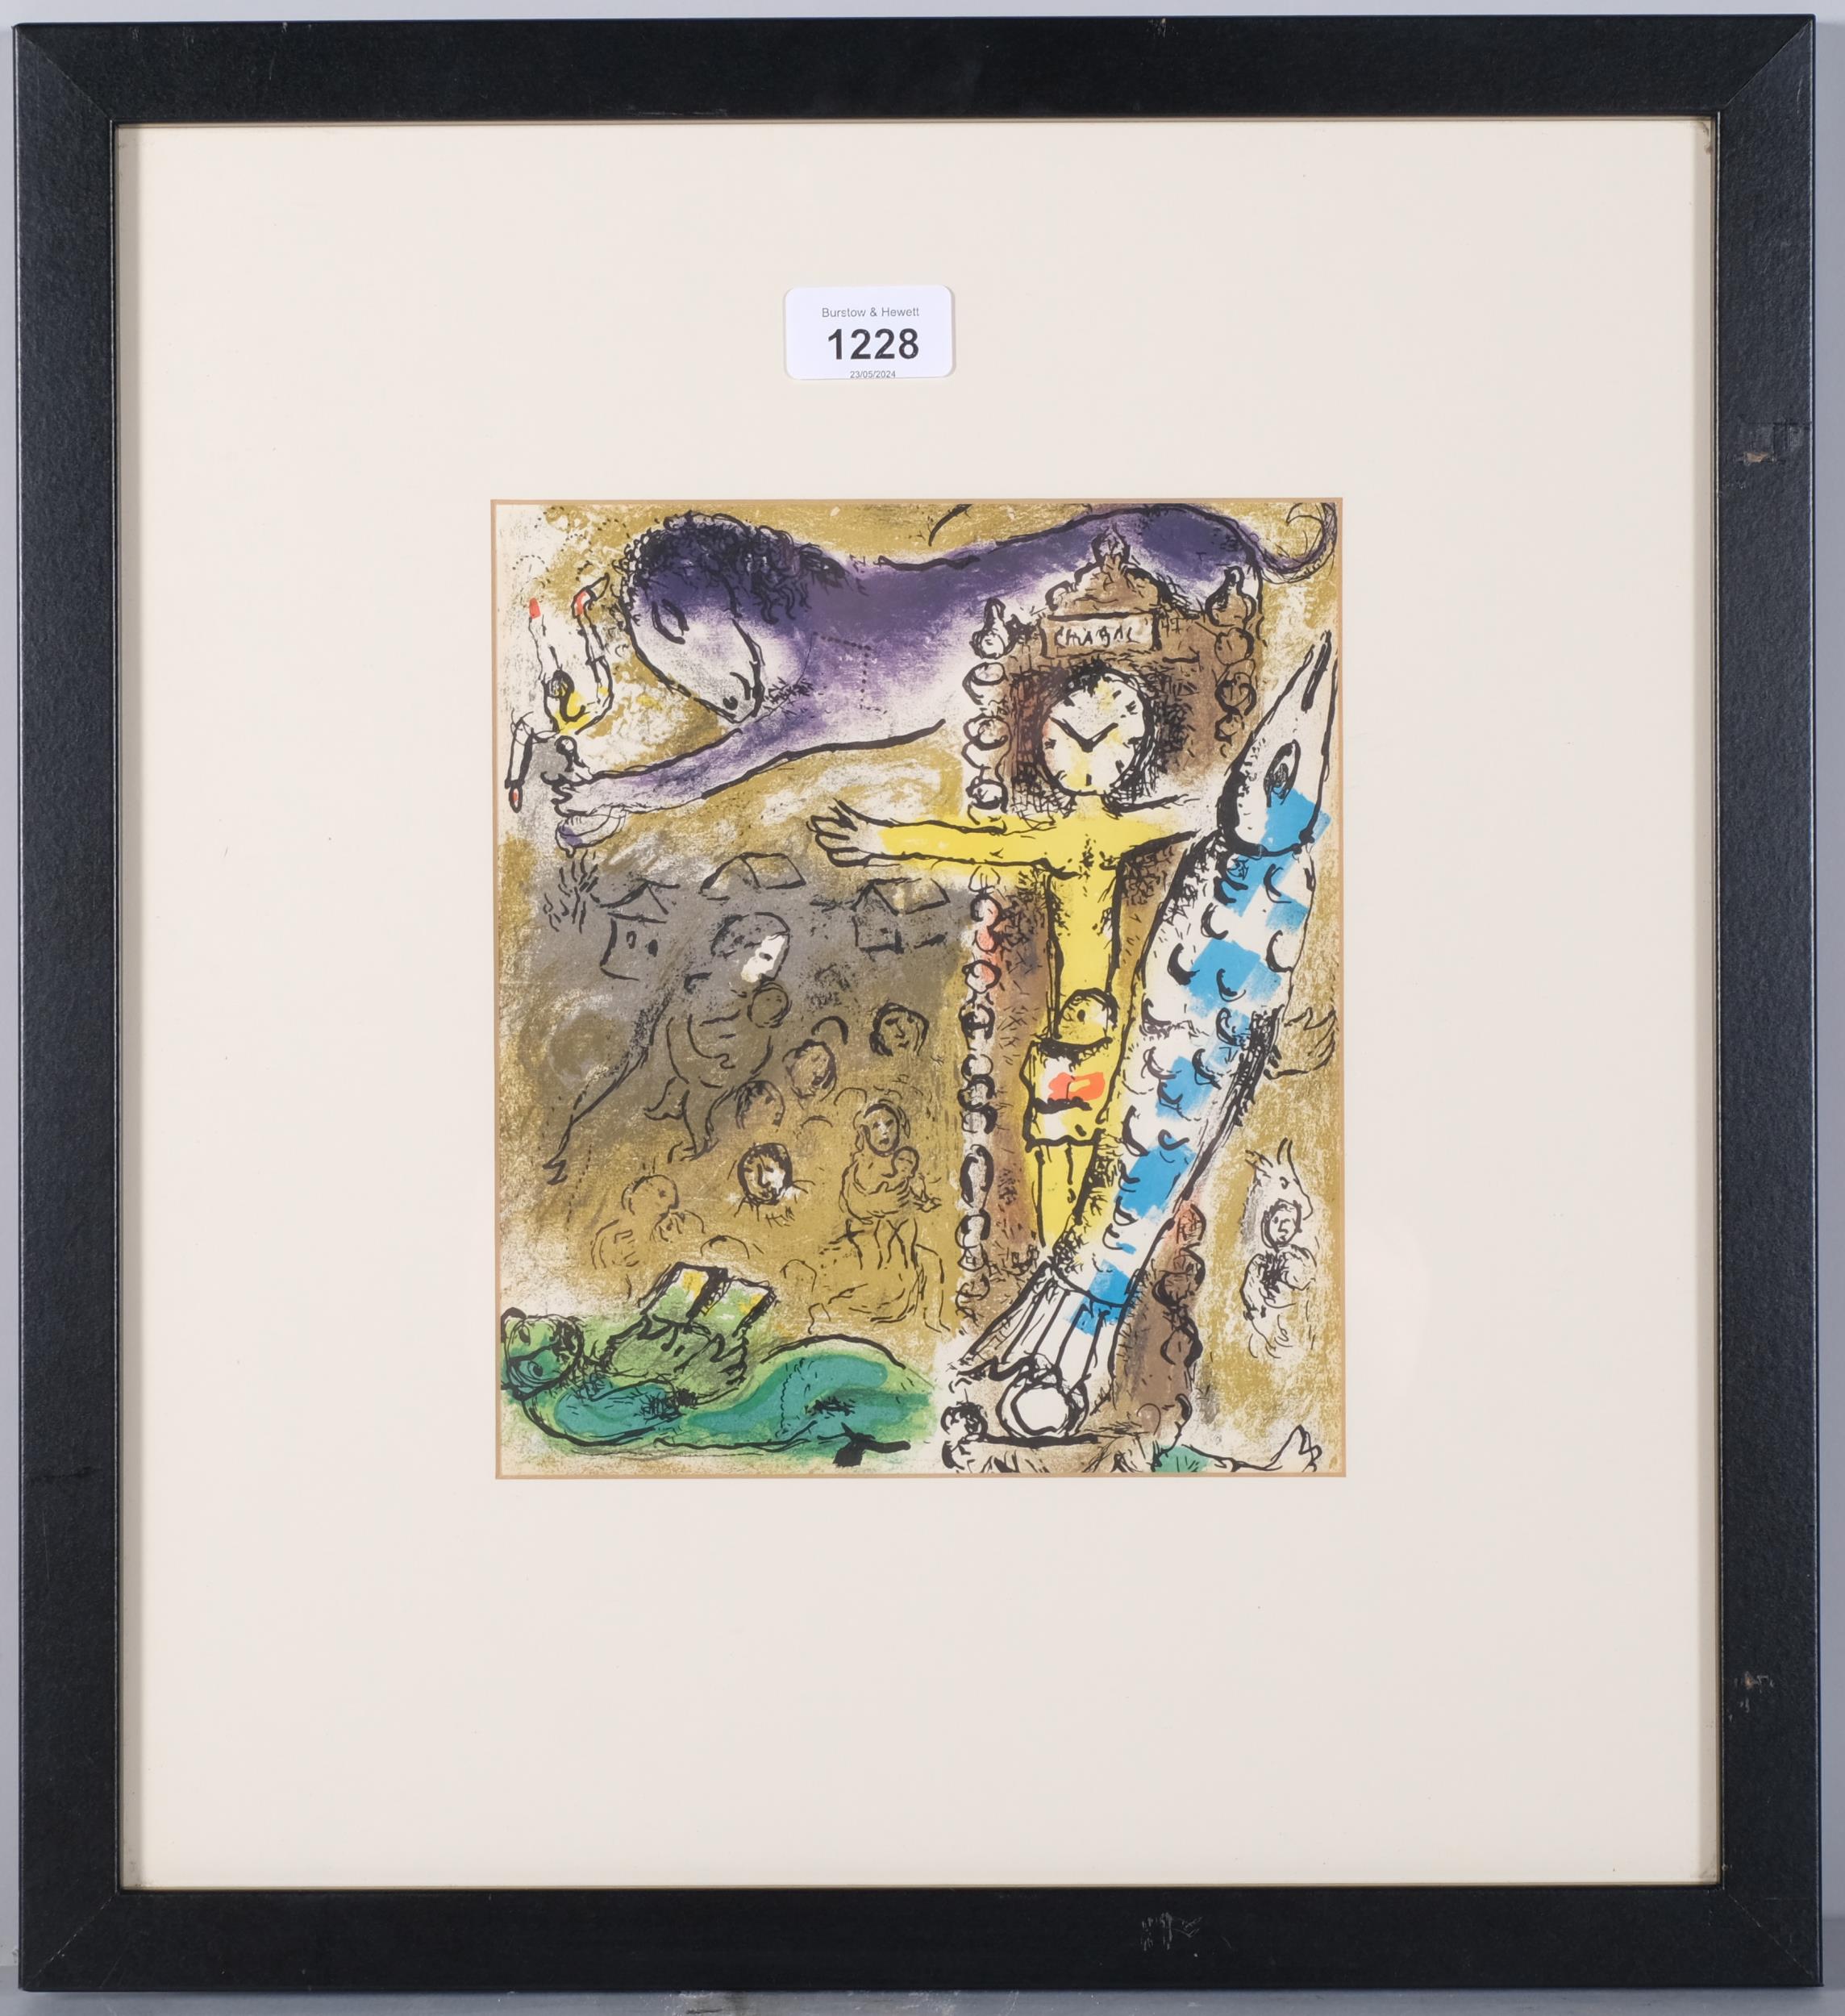 Marc Chagall, Christ In The Clock, lithograph, published 1972, 22cm x 19cm, framed Good condition - Image 2 of 4